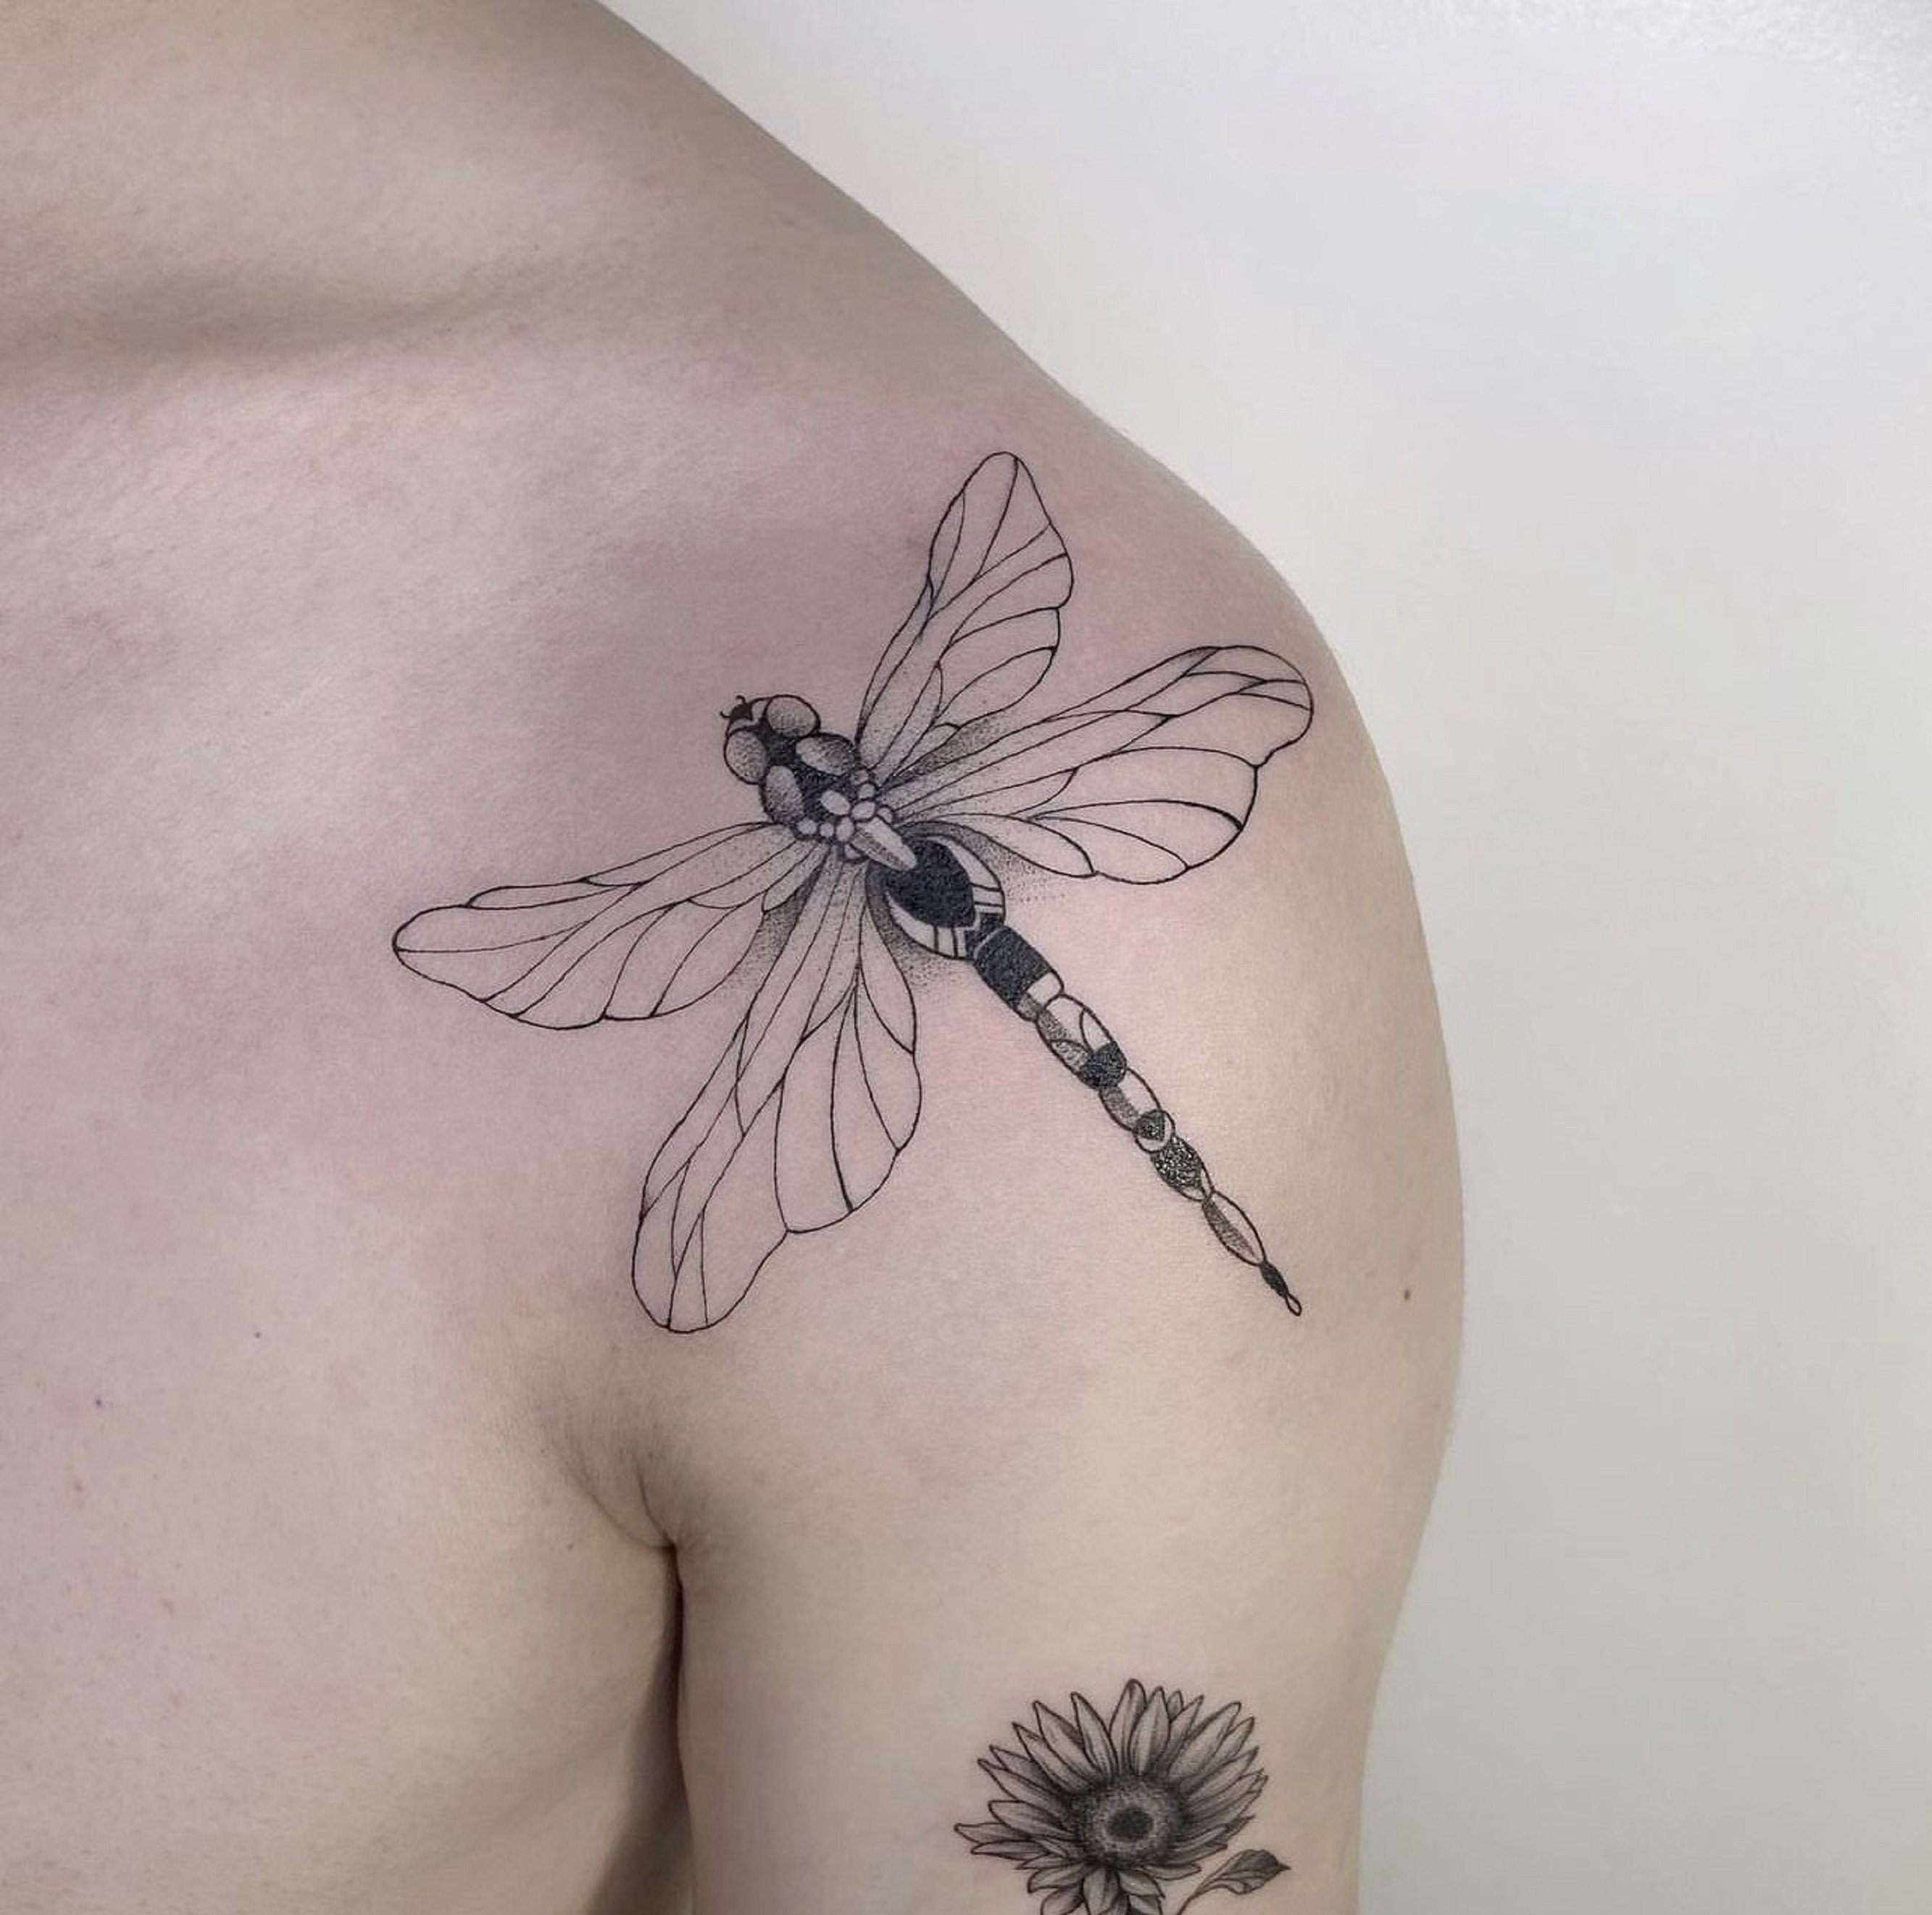 Buy Dragonfly Line Temporary Tattoo Online in India  Etsy